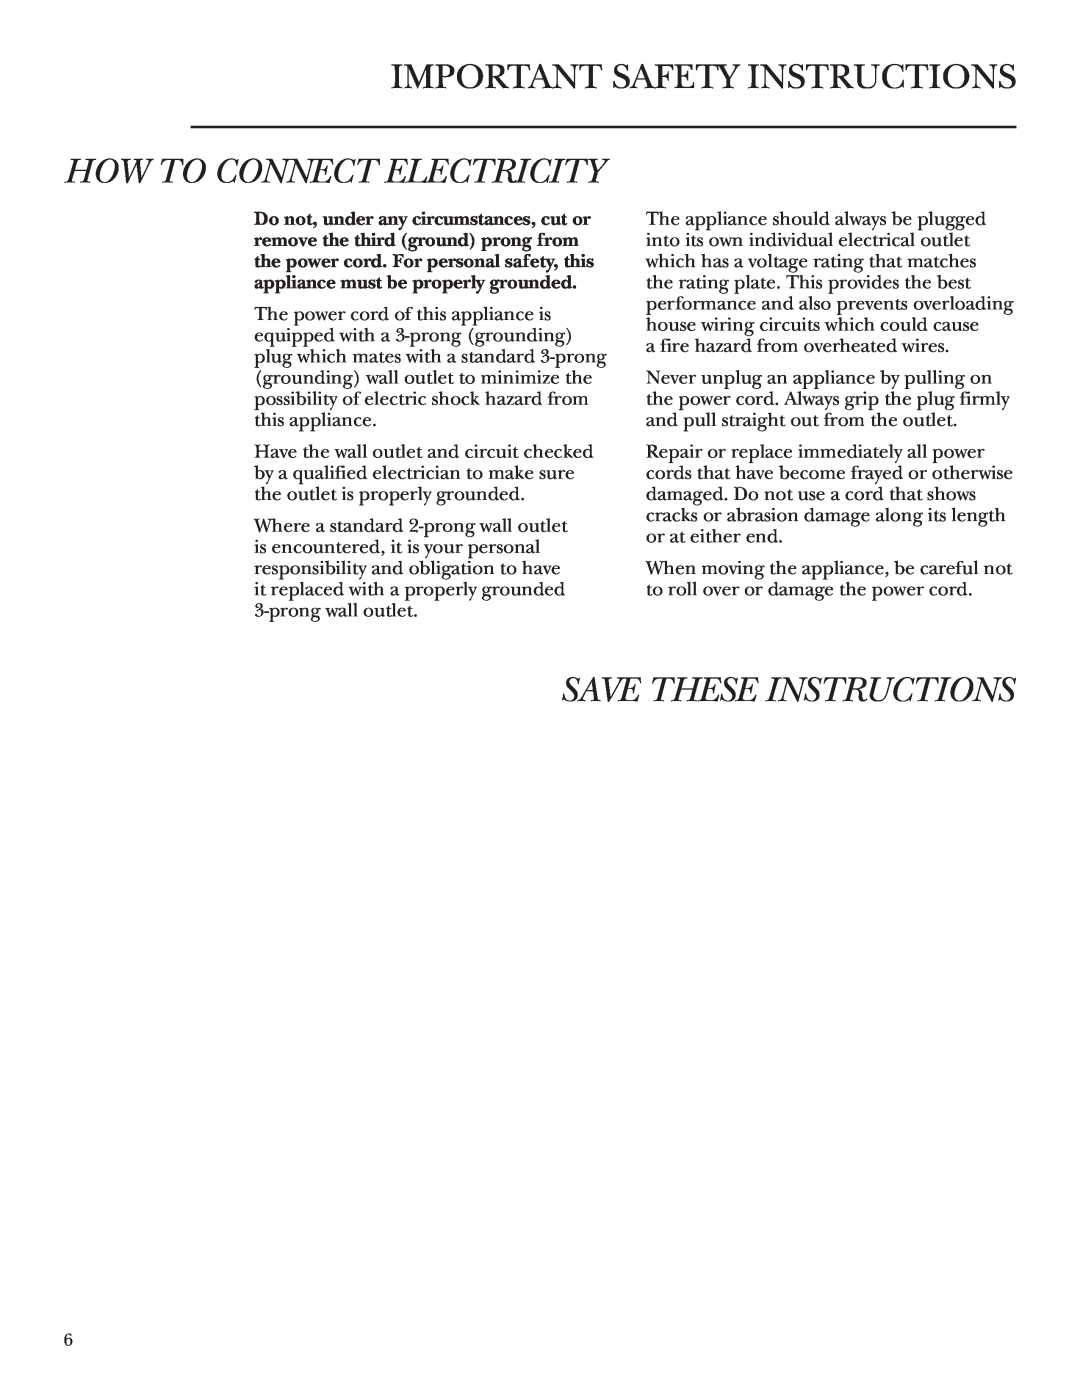 GE Monogram ZDWT240 owner manual How To Connect Electricity, Save These Instructions, Important Safety Instructions 